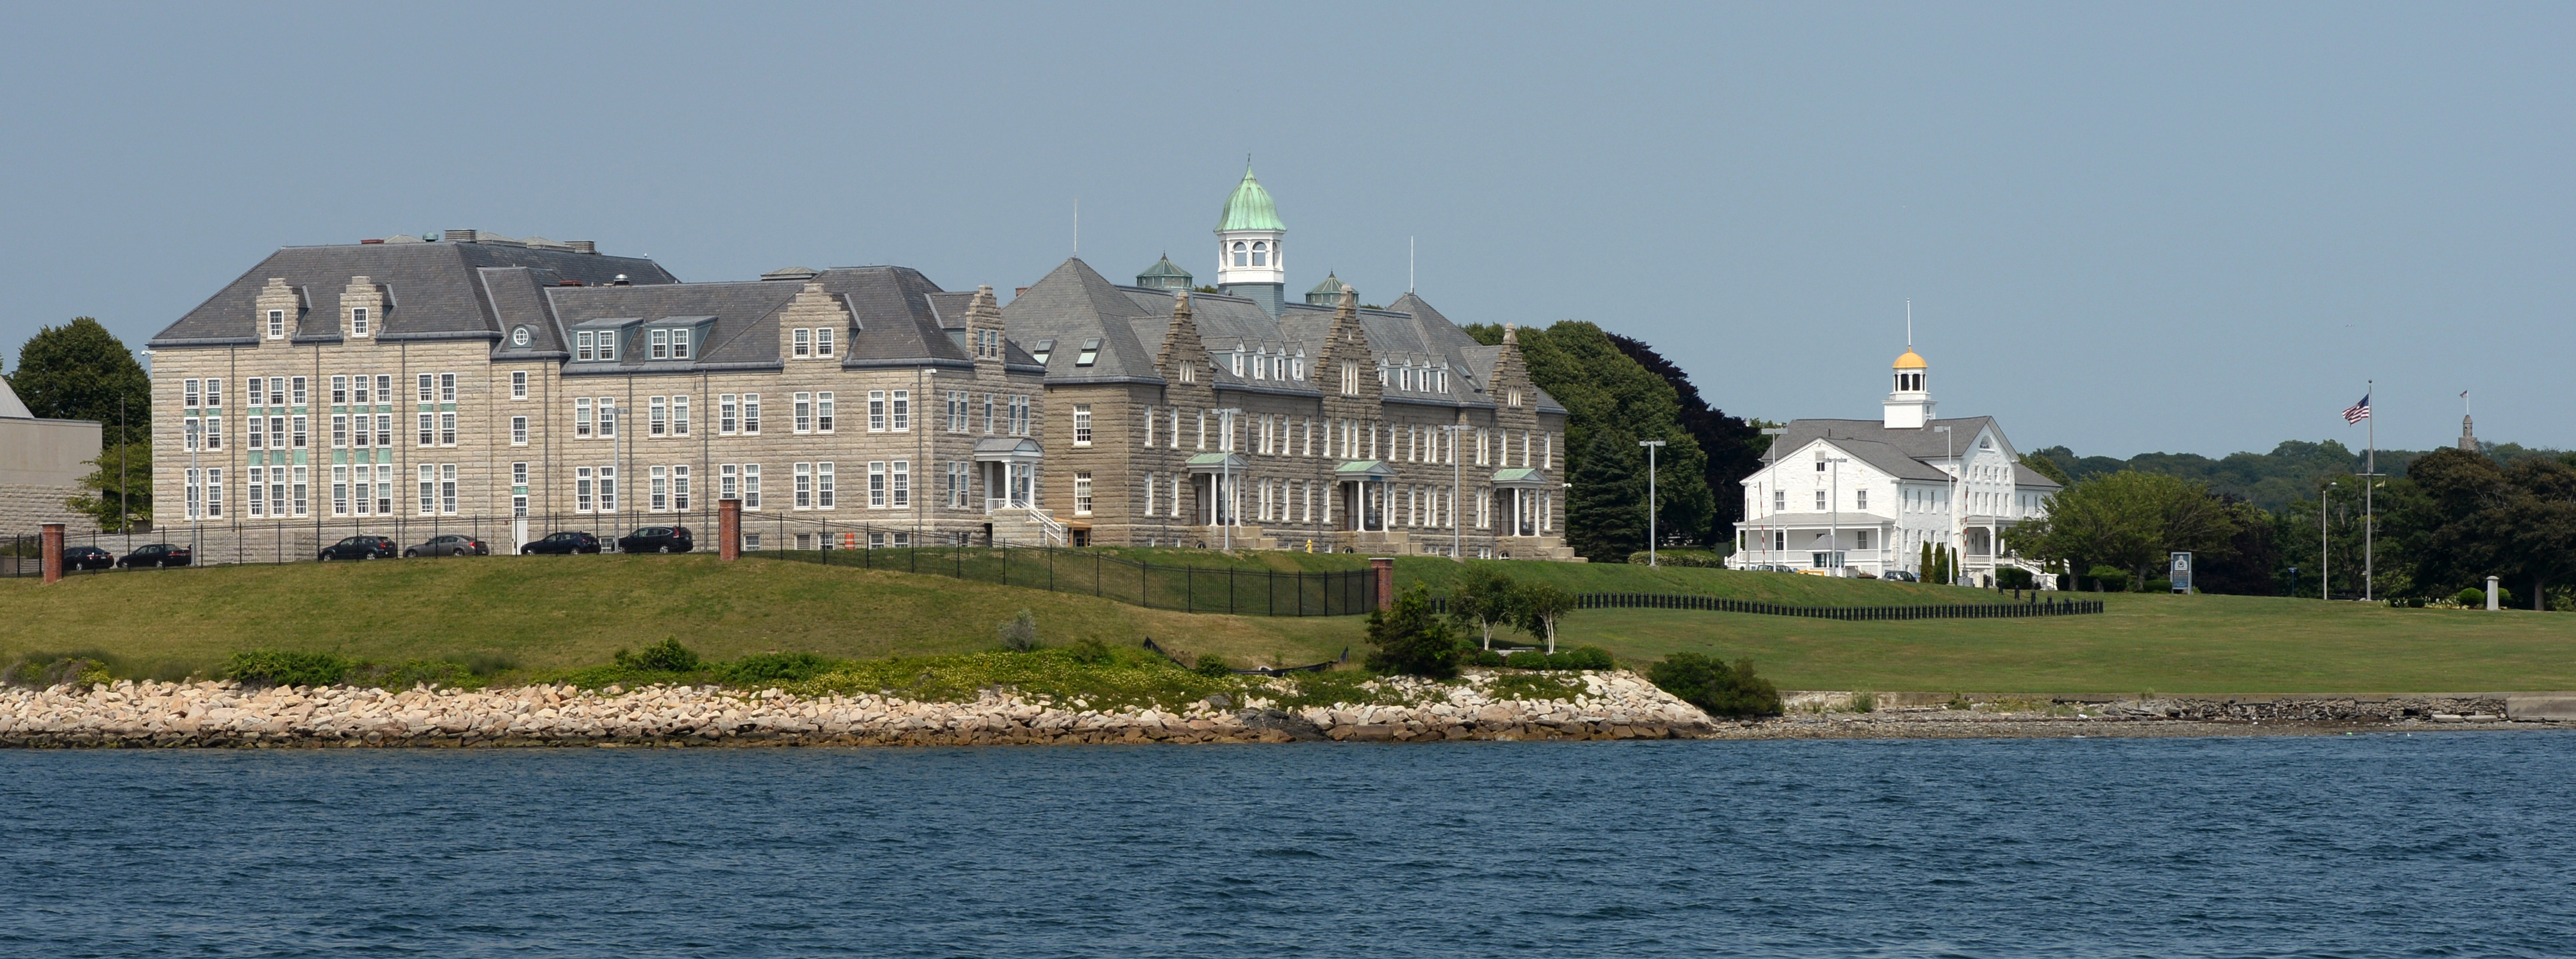 150713-N-PX557-106 NEWPORT, R.I. (July 13, 2015) U.S. Naval War College (NWC) on Coasters Harbor Island, Newport, Rhode Island. Established in 1884, the NWC is the oldest institution of its kind in the world. More than 50,000 students have graduated since its first class of 9 students in 1885 and about 300 of today’s active-duty admirals and generals and senior executive service leaders are alumni. (U.S. Navy photo by Chief Mass Communication Specialist James E. Foehl/Released)